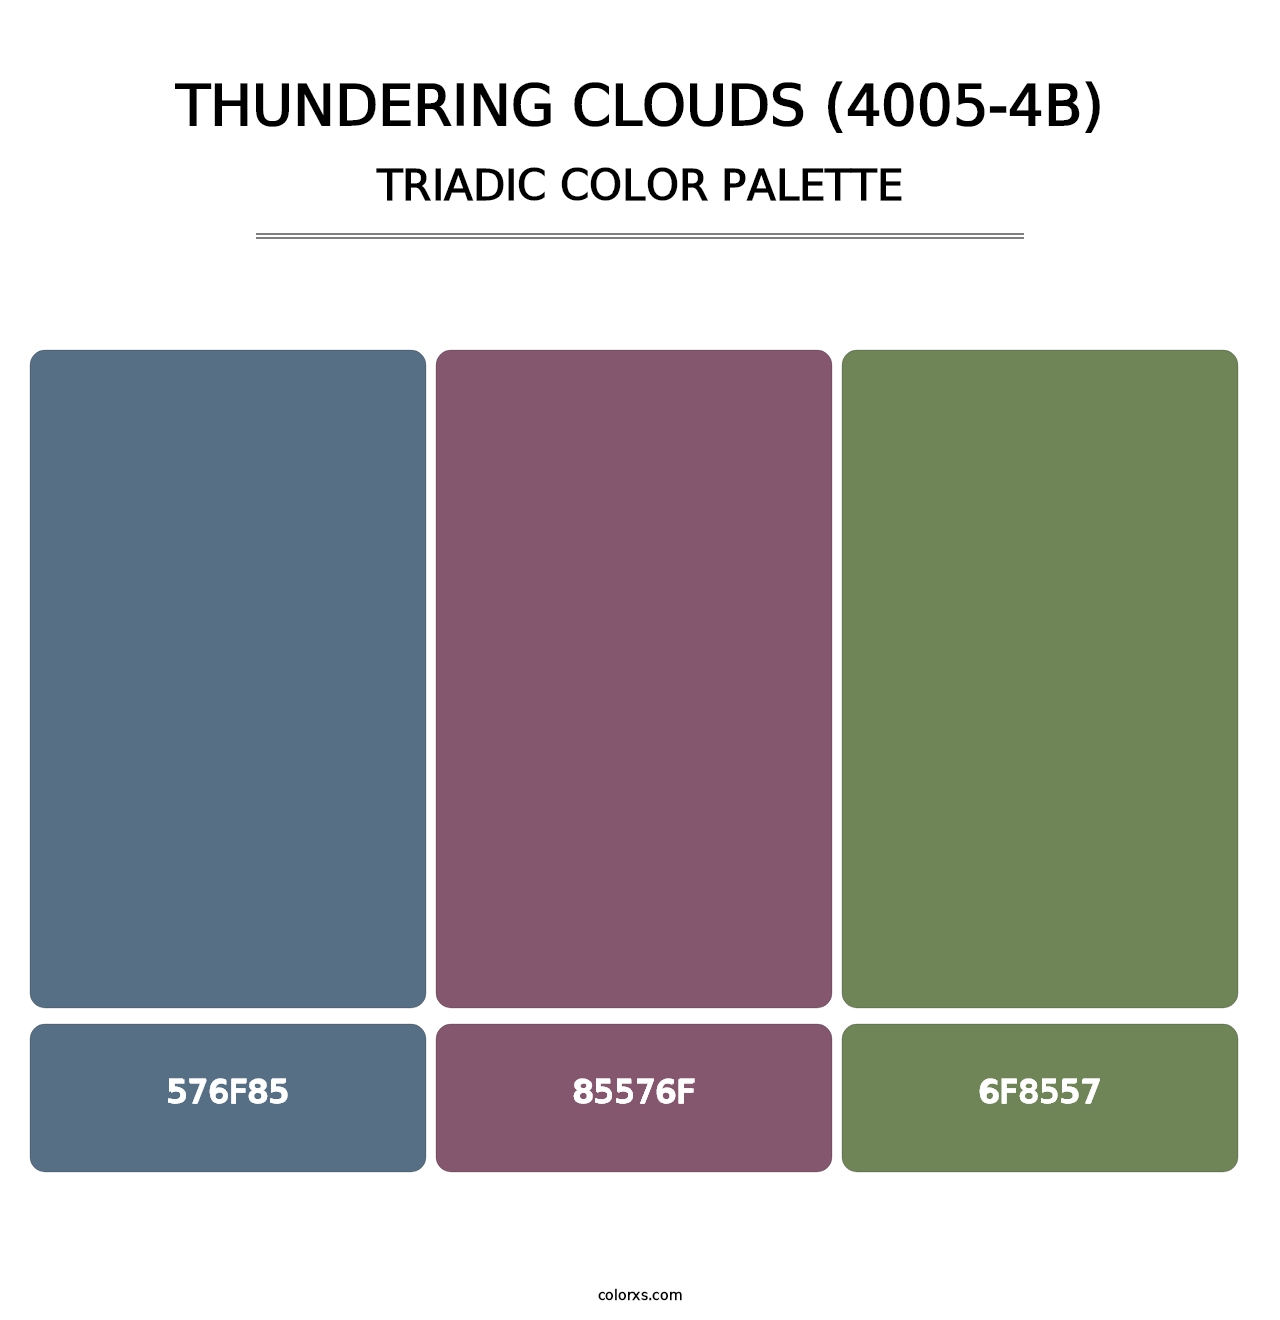 Thundering Clouds (4005-4B) - Triadic Color Palette